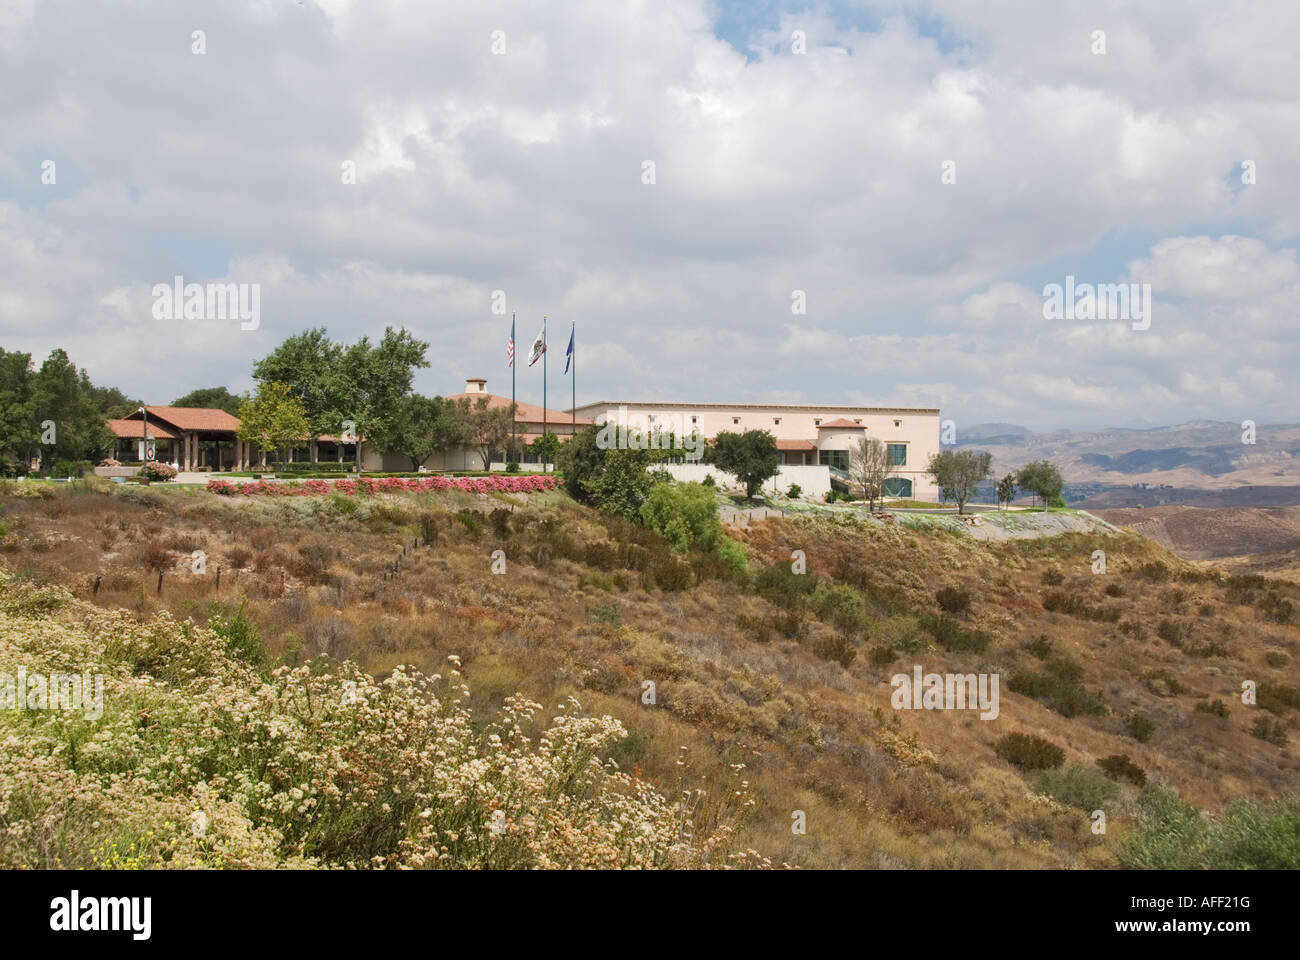 Simi Valley Californie Ronald W Reagan Presidential Library and Museum Banque D'Images